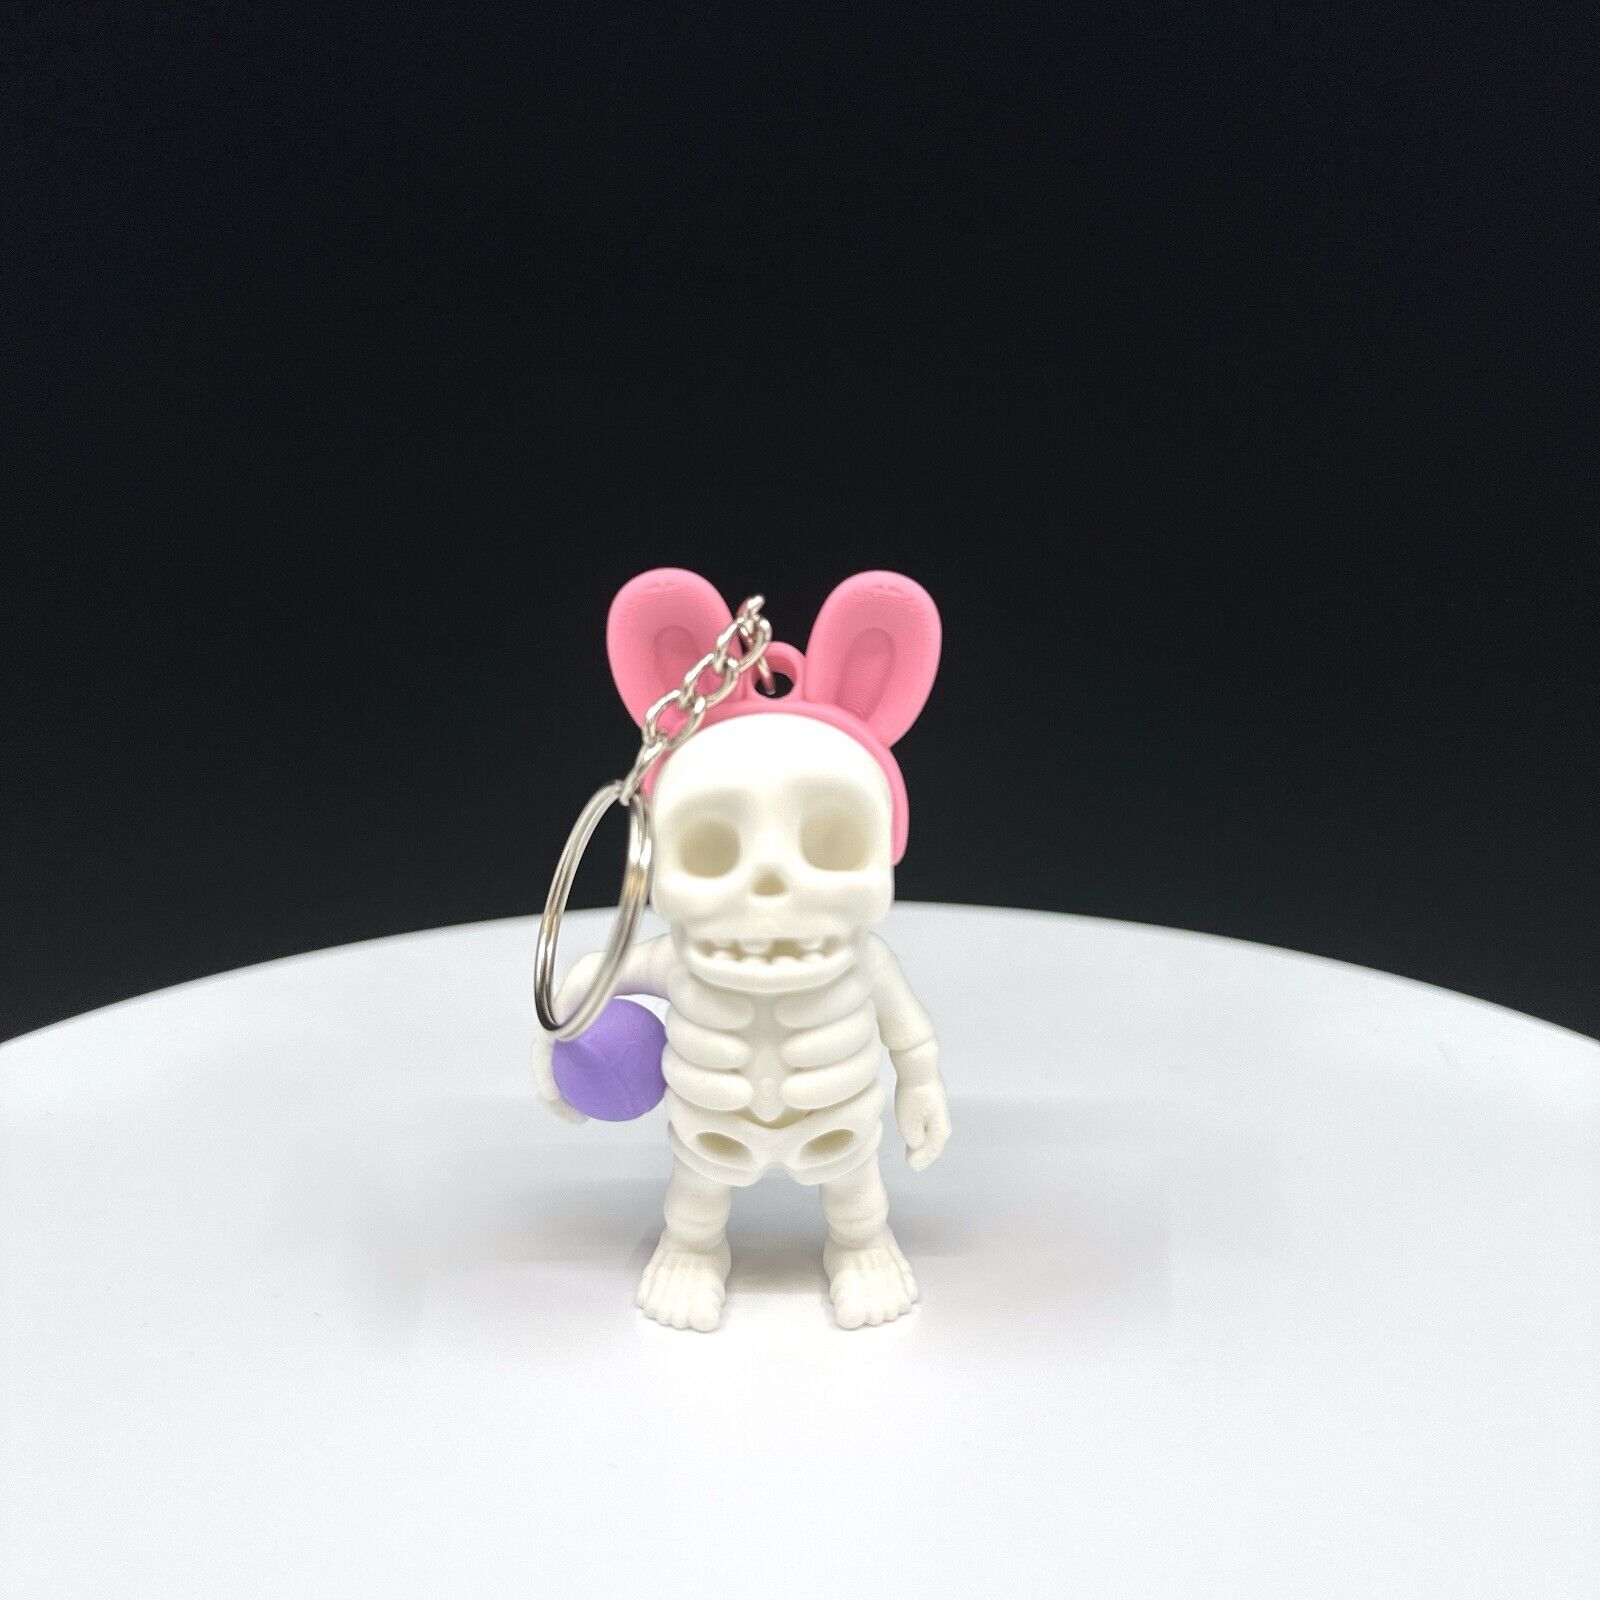 ZOU3D Tiny Easter Skeleton with an Egg keychain 3D Printed